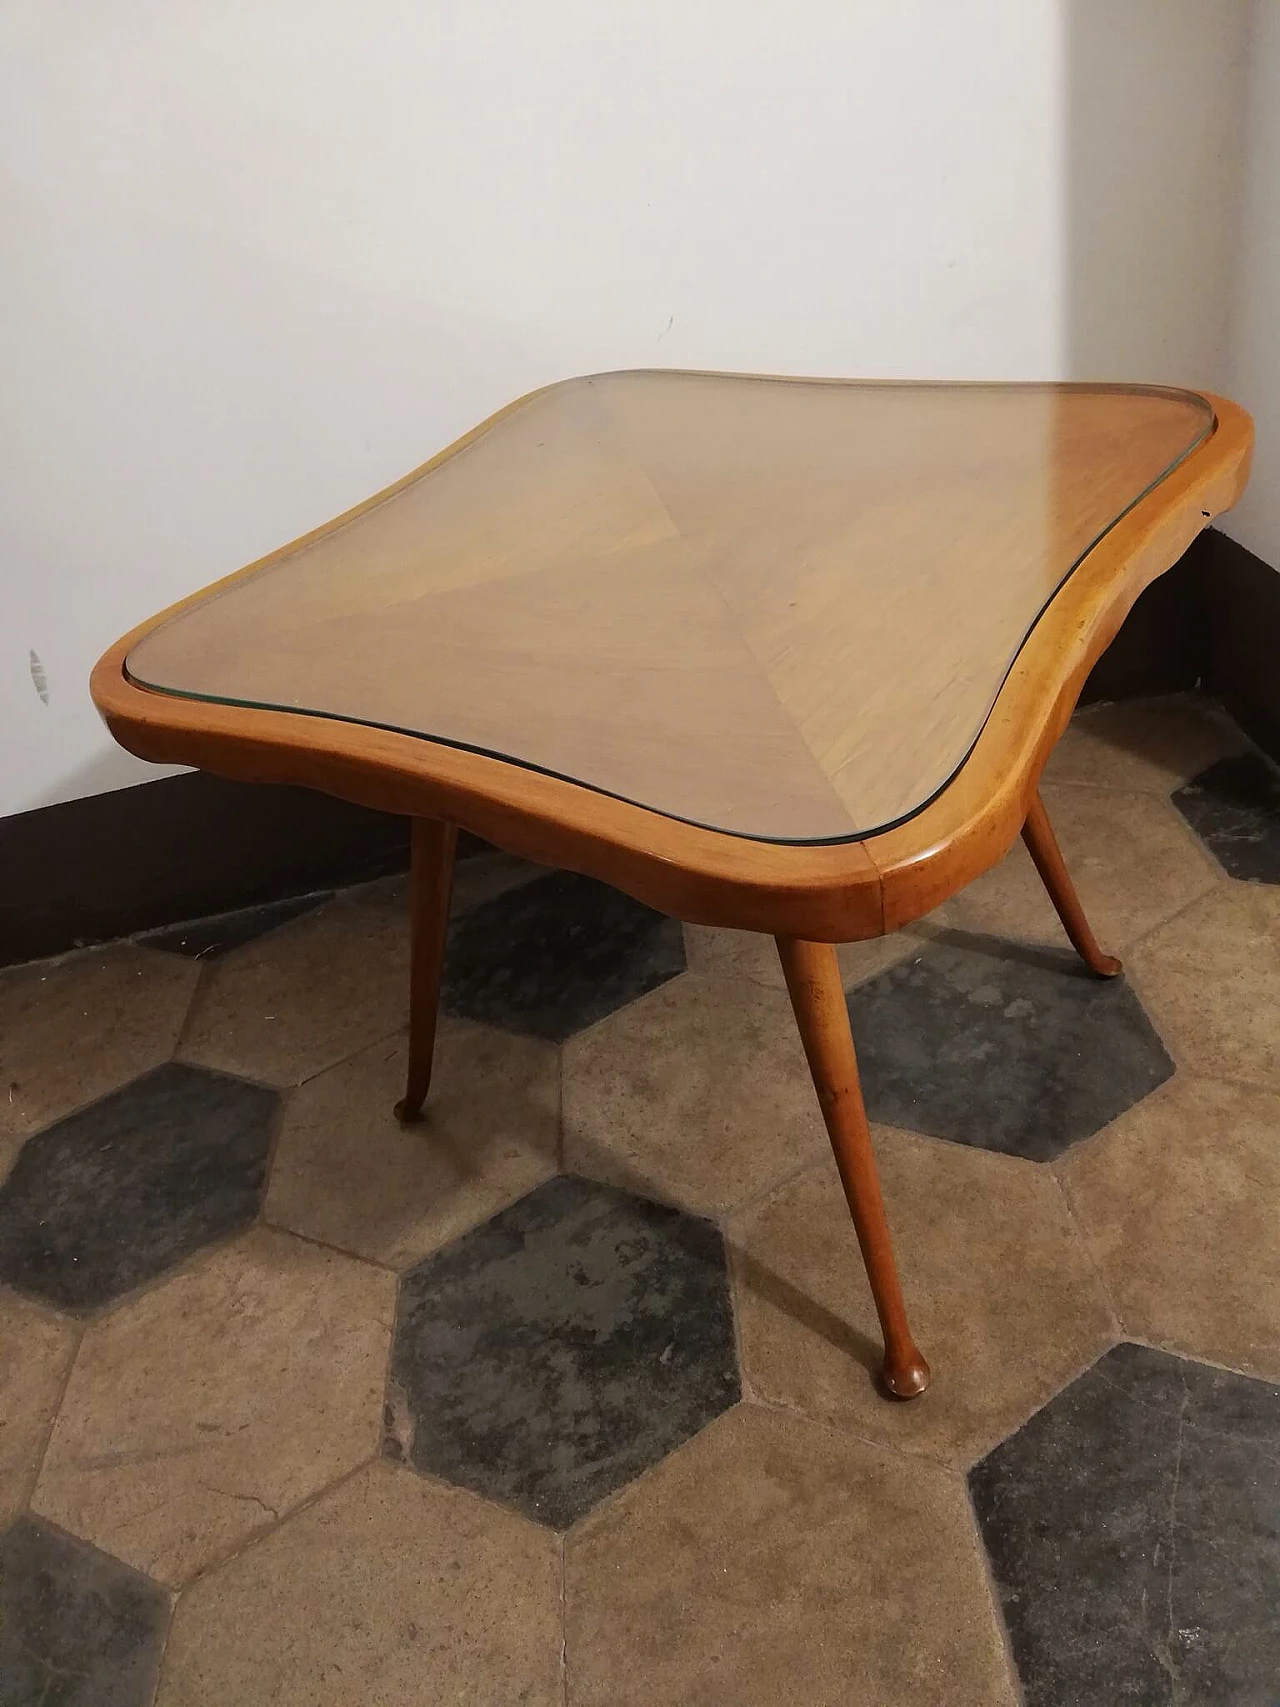 Wooden coffee table and glass top, 1950's 1083615